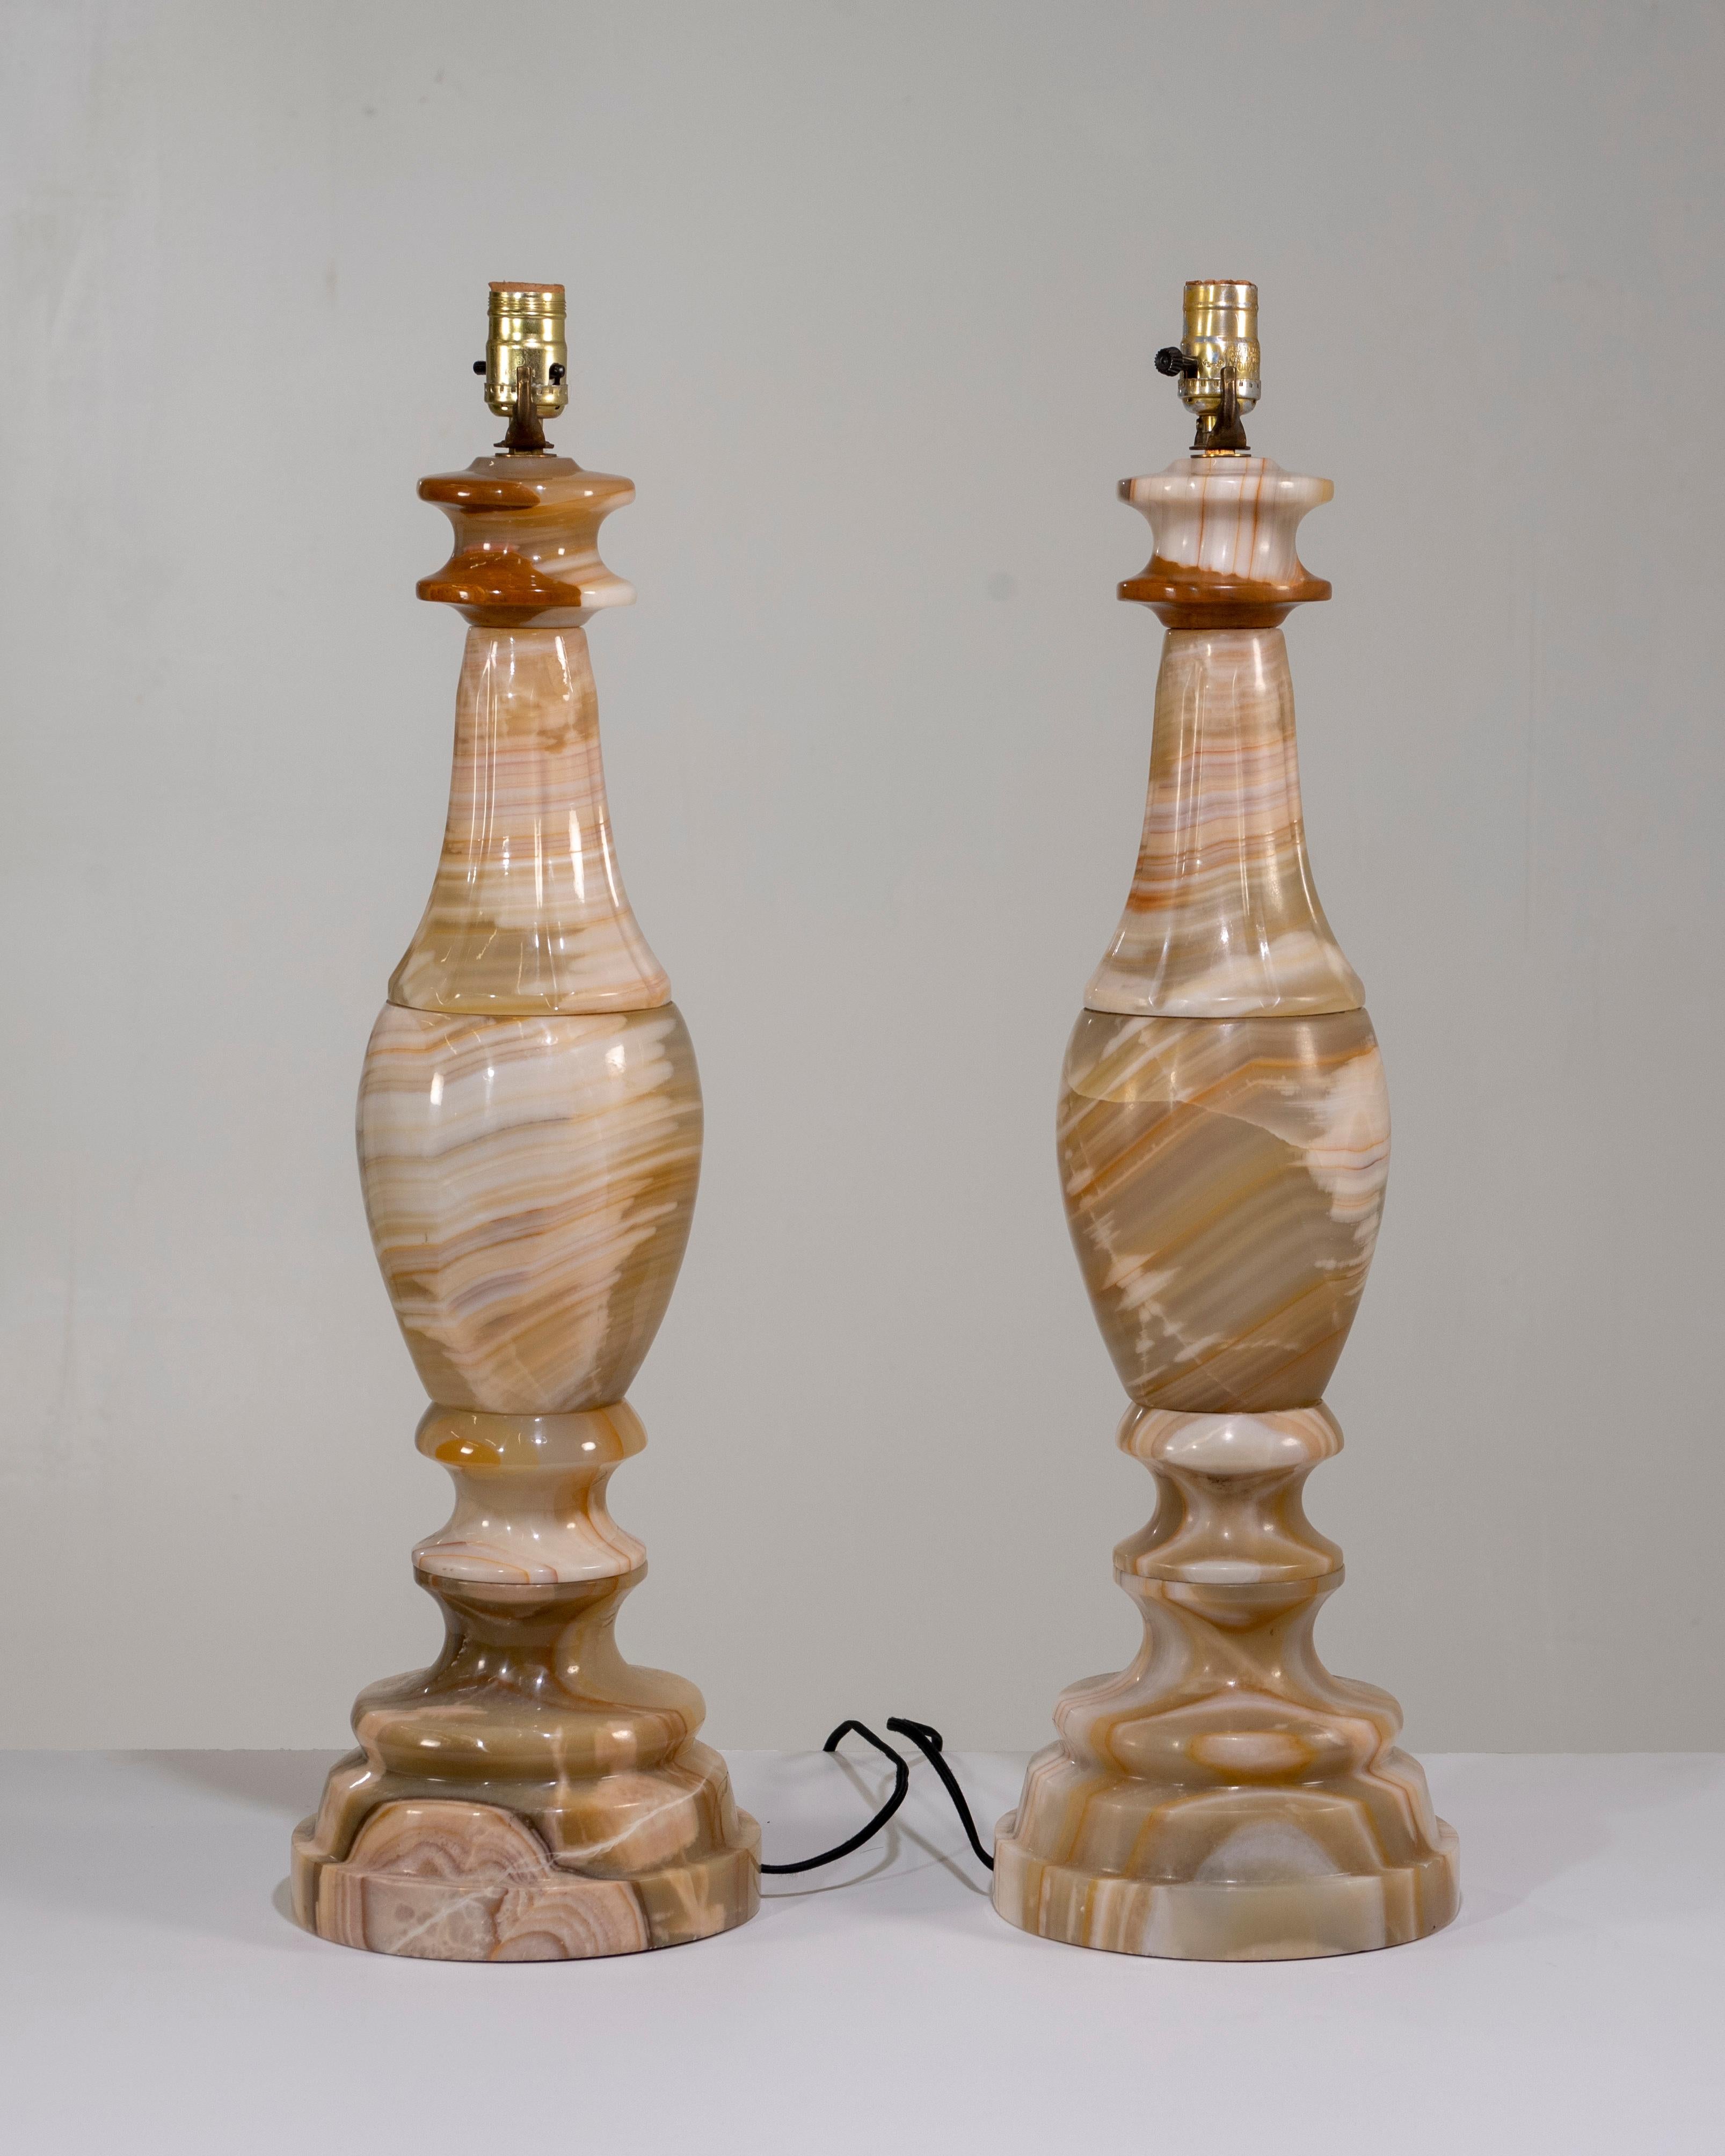 Stunning Pair of Large Scale Neoclassical Onyx Table Lamps 2